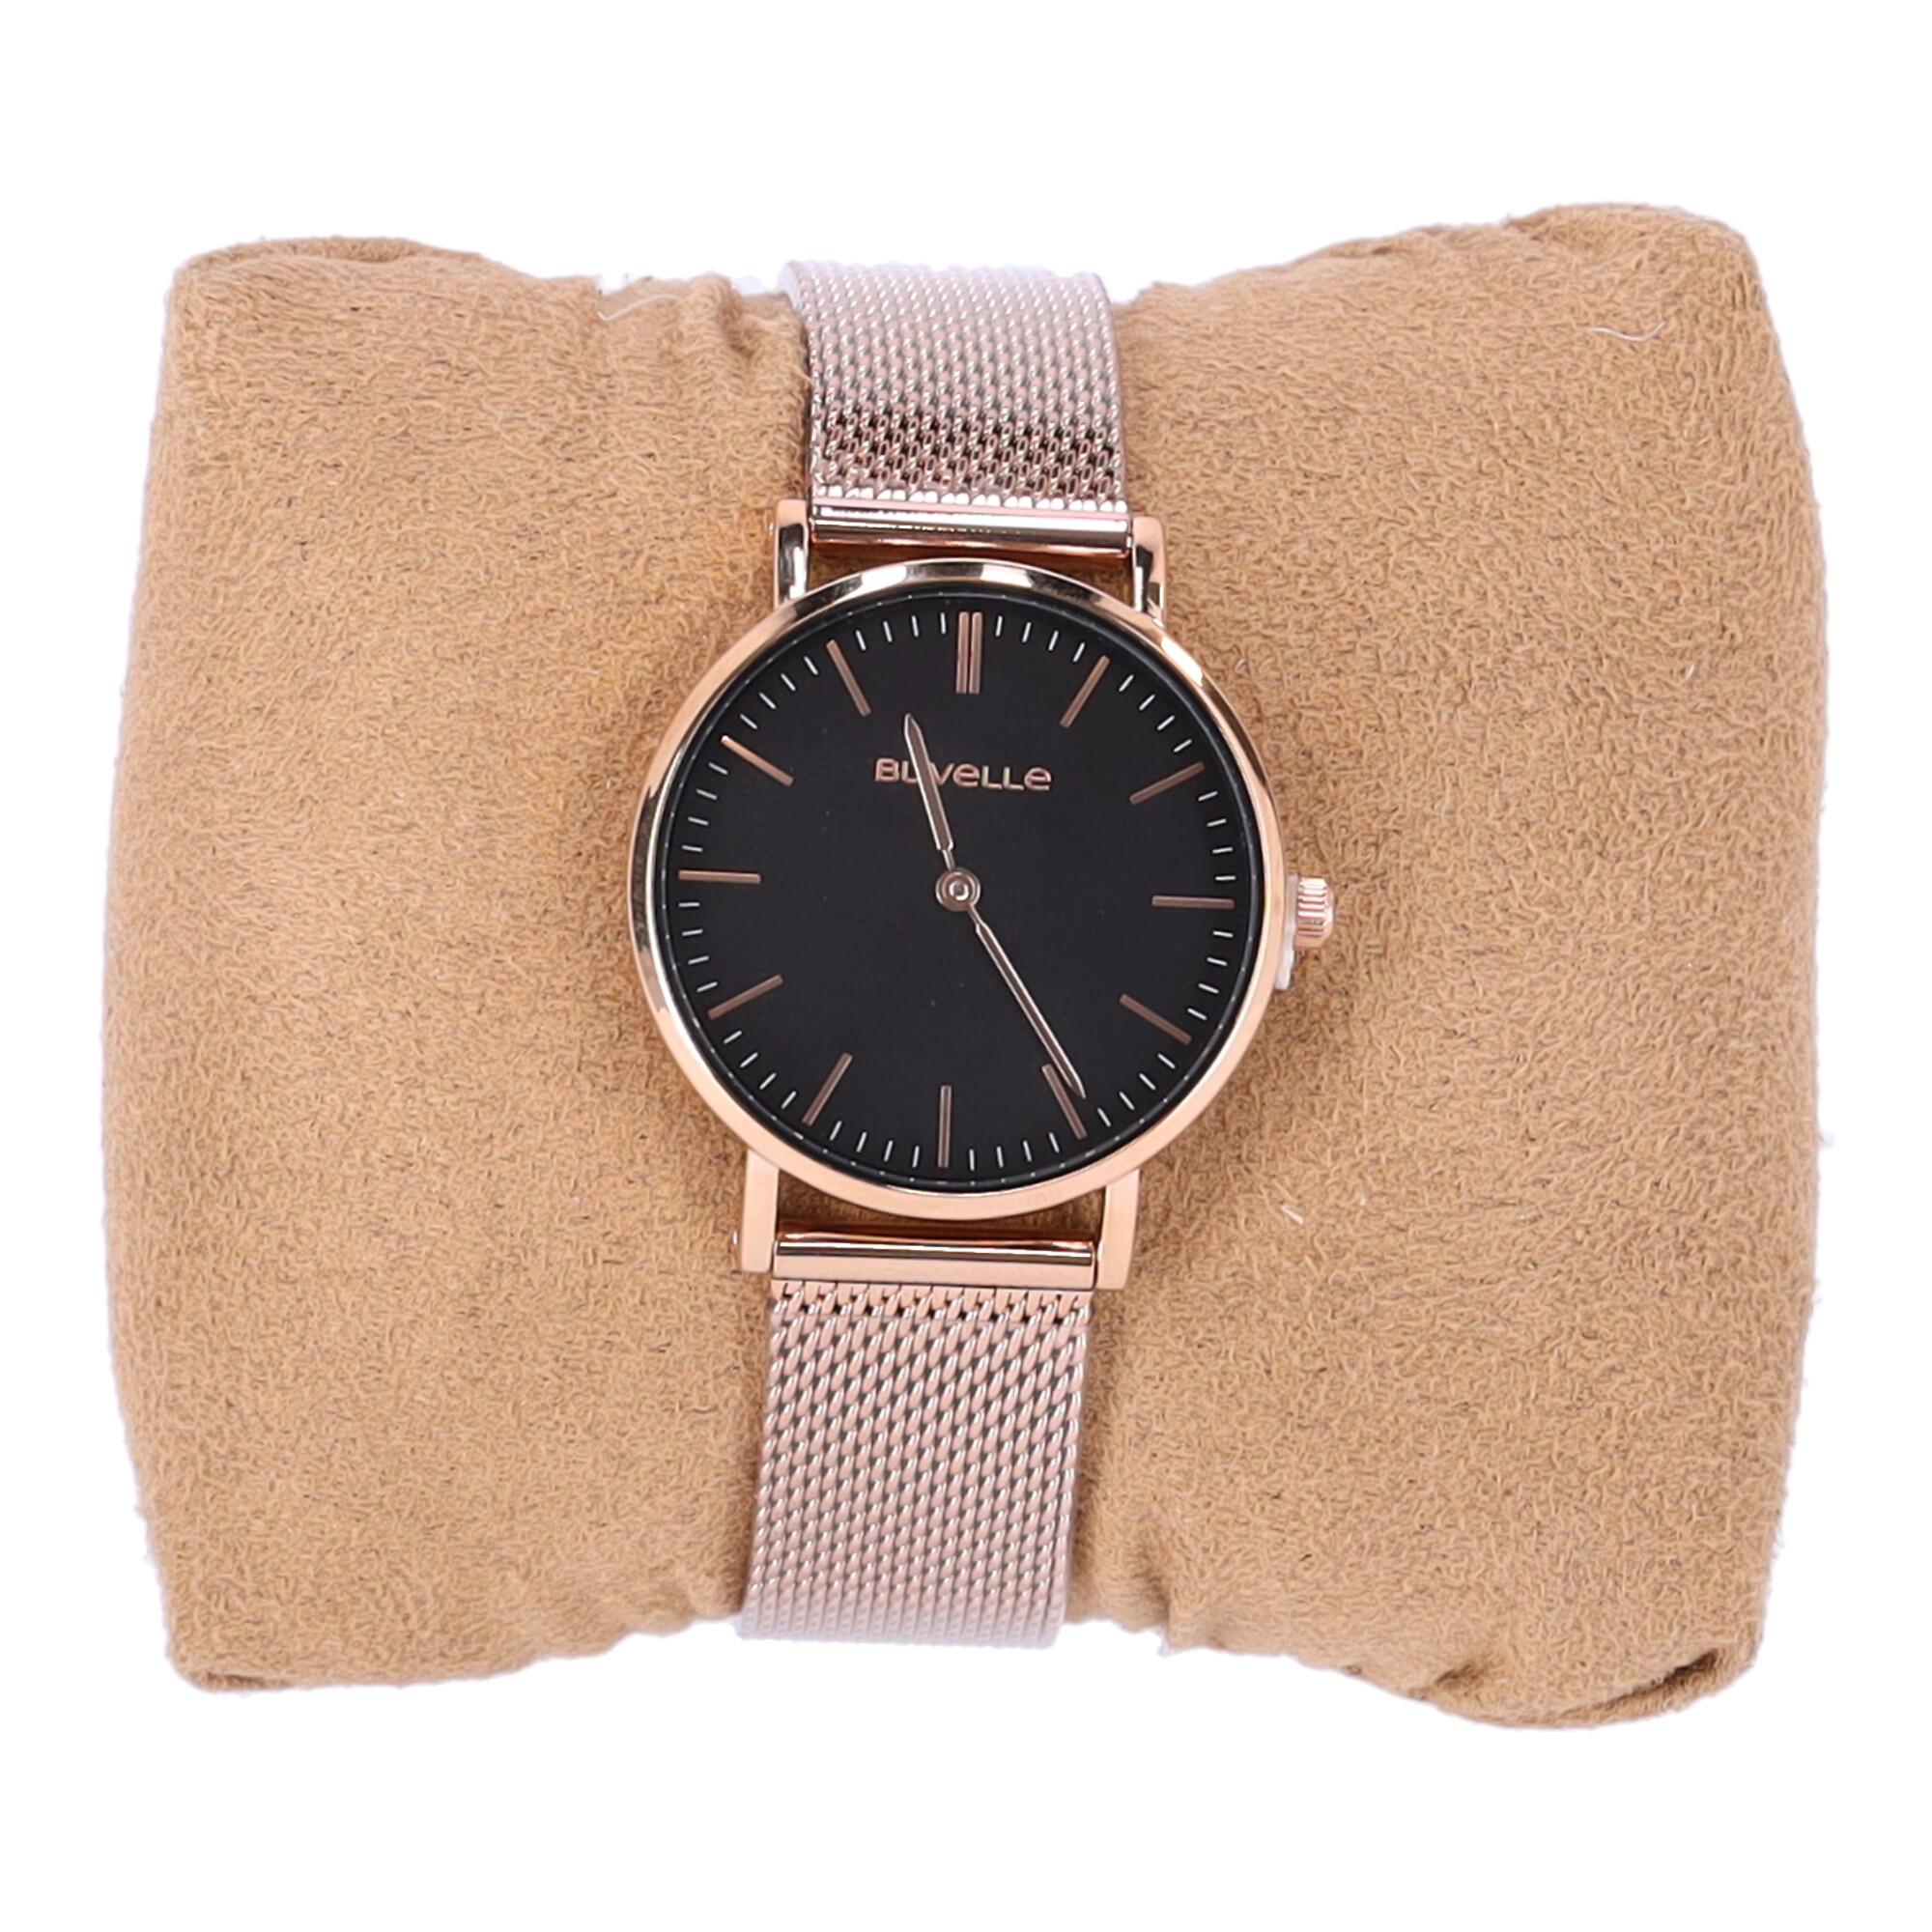 Women's watch BUVELLE - rose gold